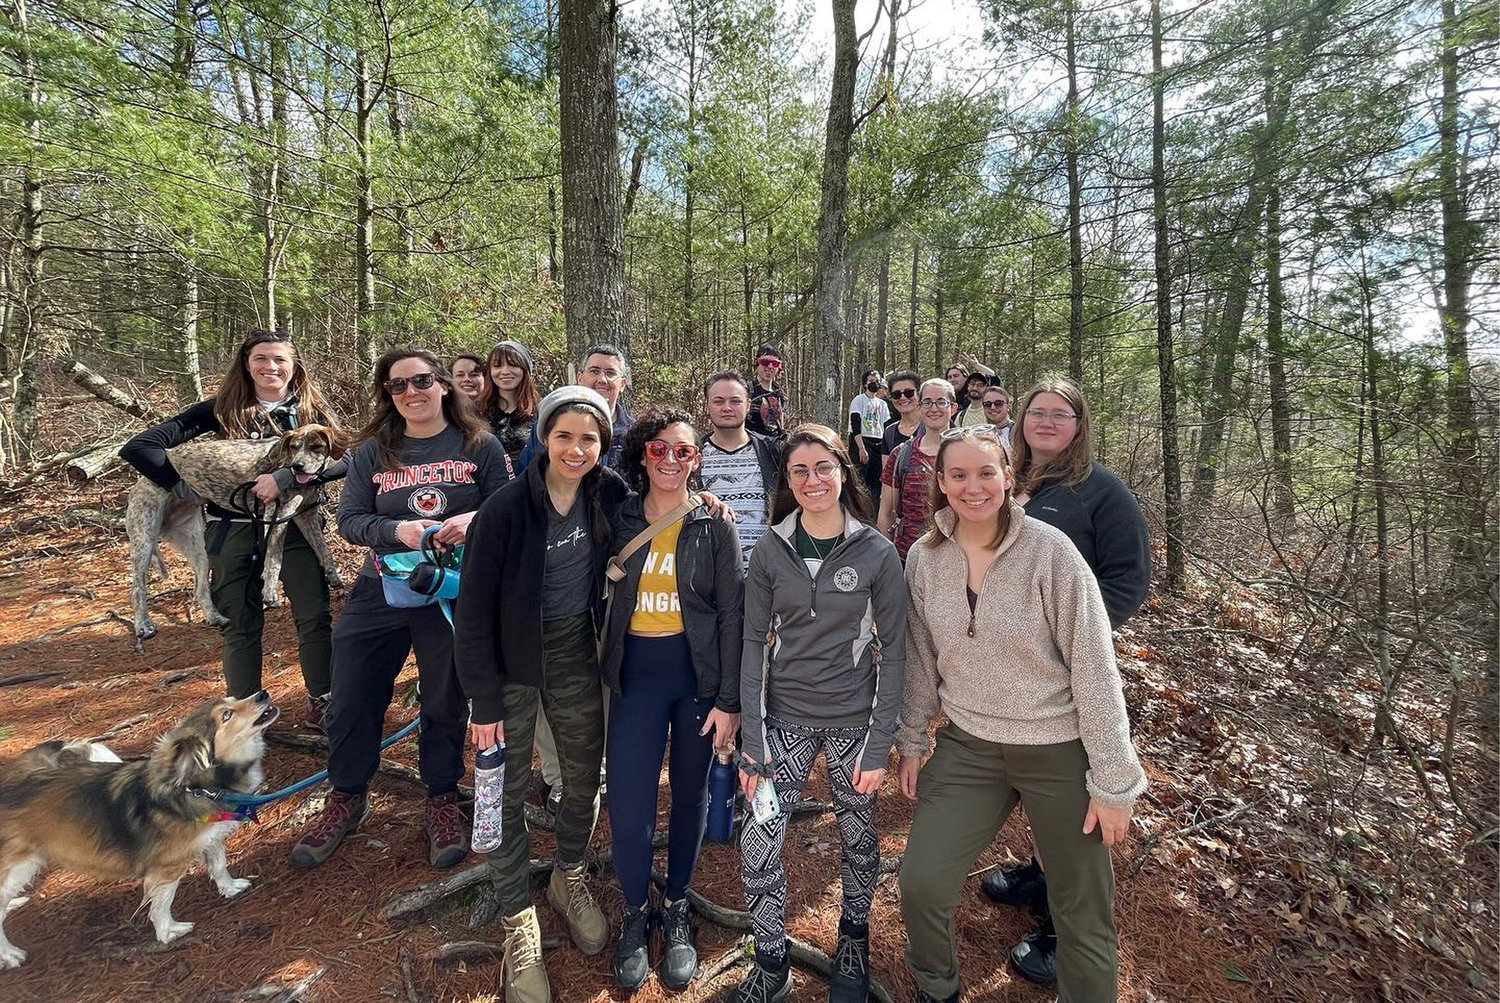 RI Queer Hikes members trekked Tillinghast Pond Management Area in West Greenwich this past March